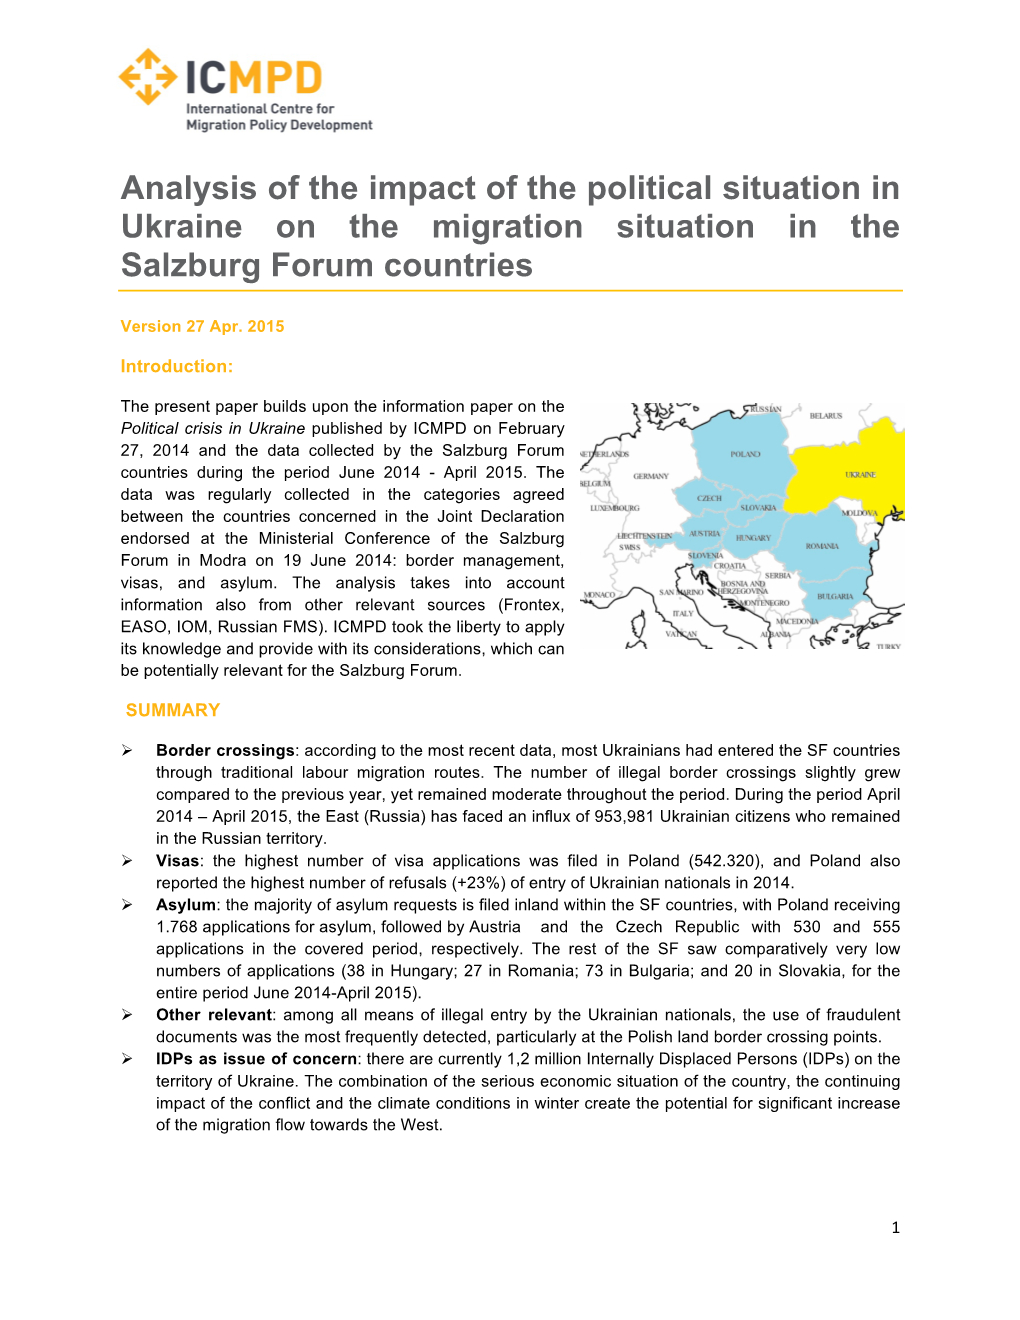 Analysis of the Impact of the Political Situation in Ukraine on the Migration Situation in the Salzburg Forum Countries